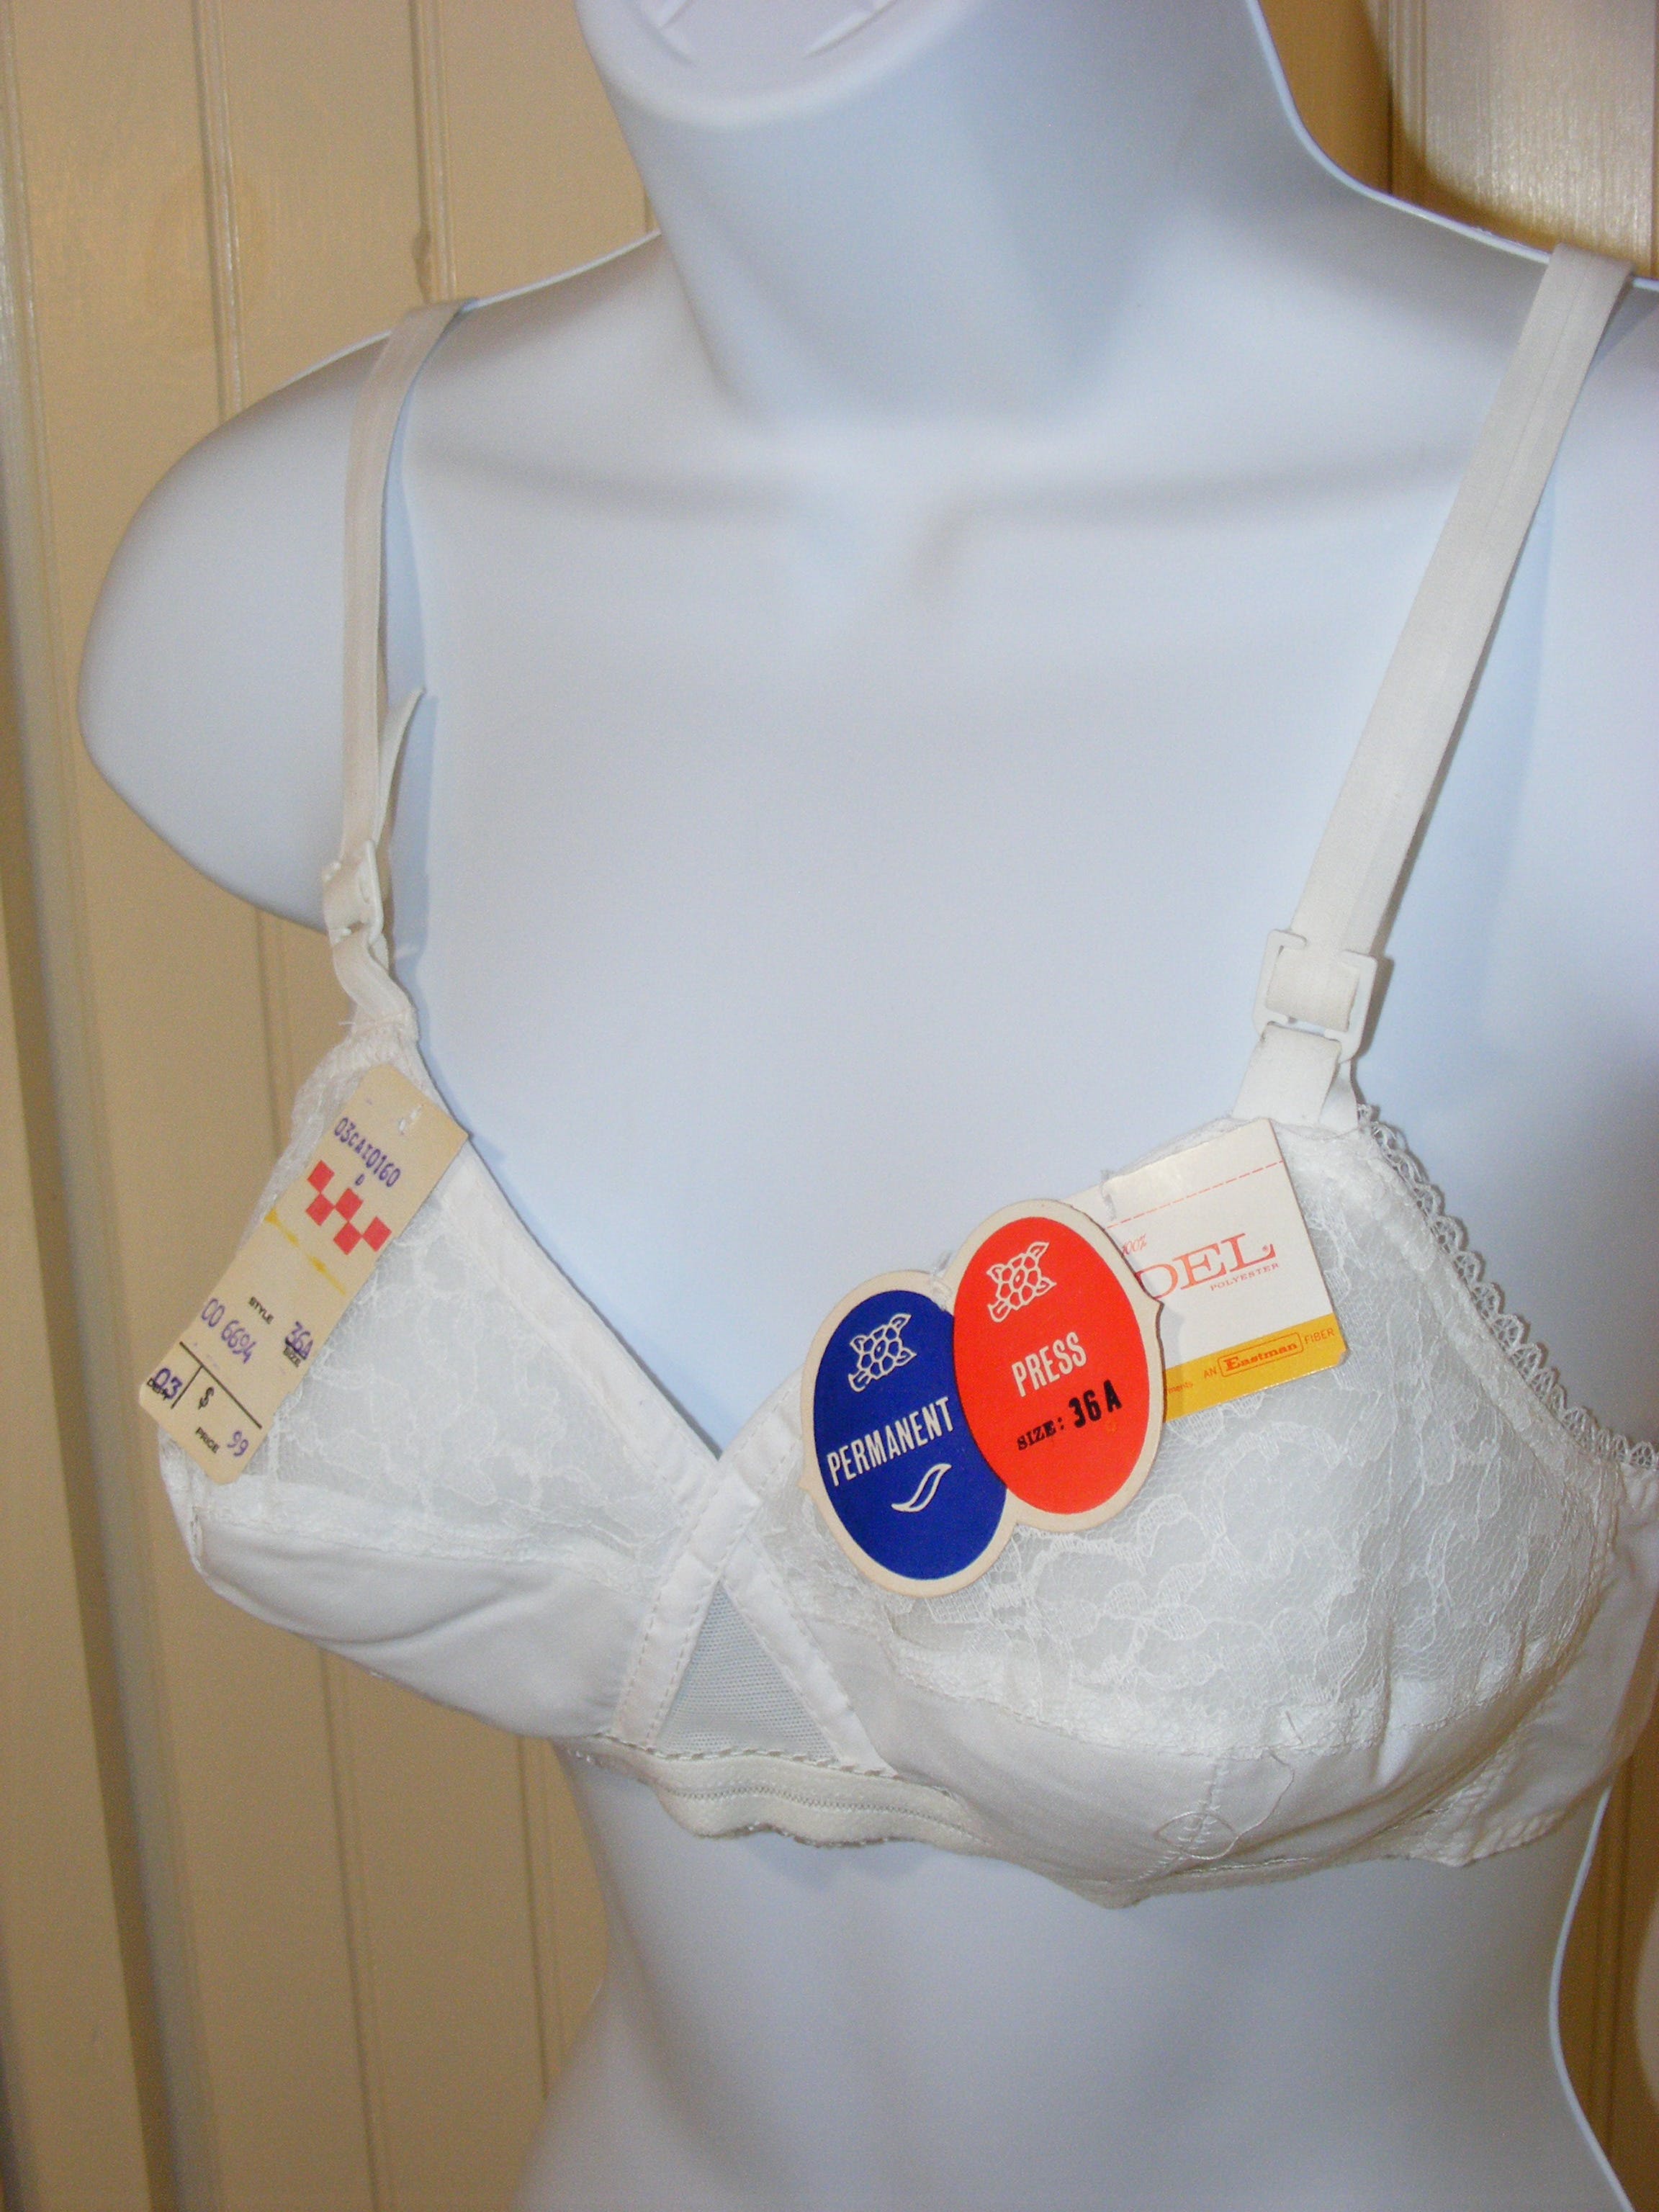 80s Bra 36a Deadstock With Tag Lace Half Cups Fiberfil By Kodel